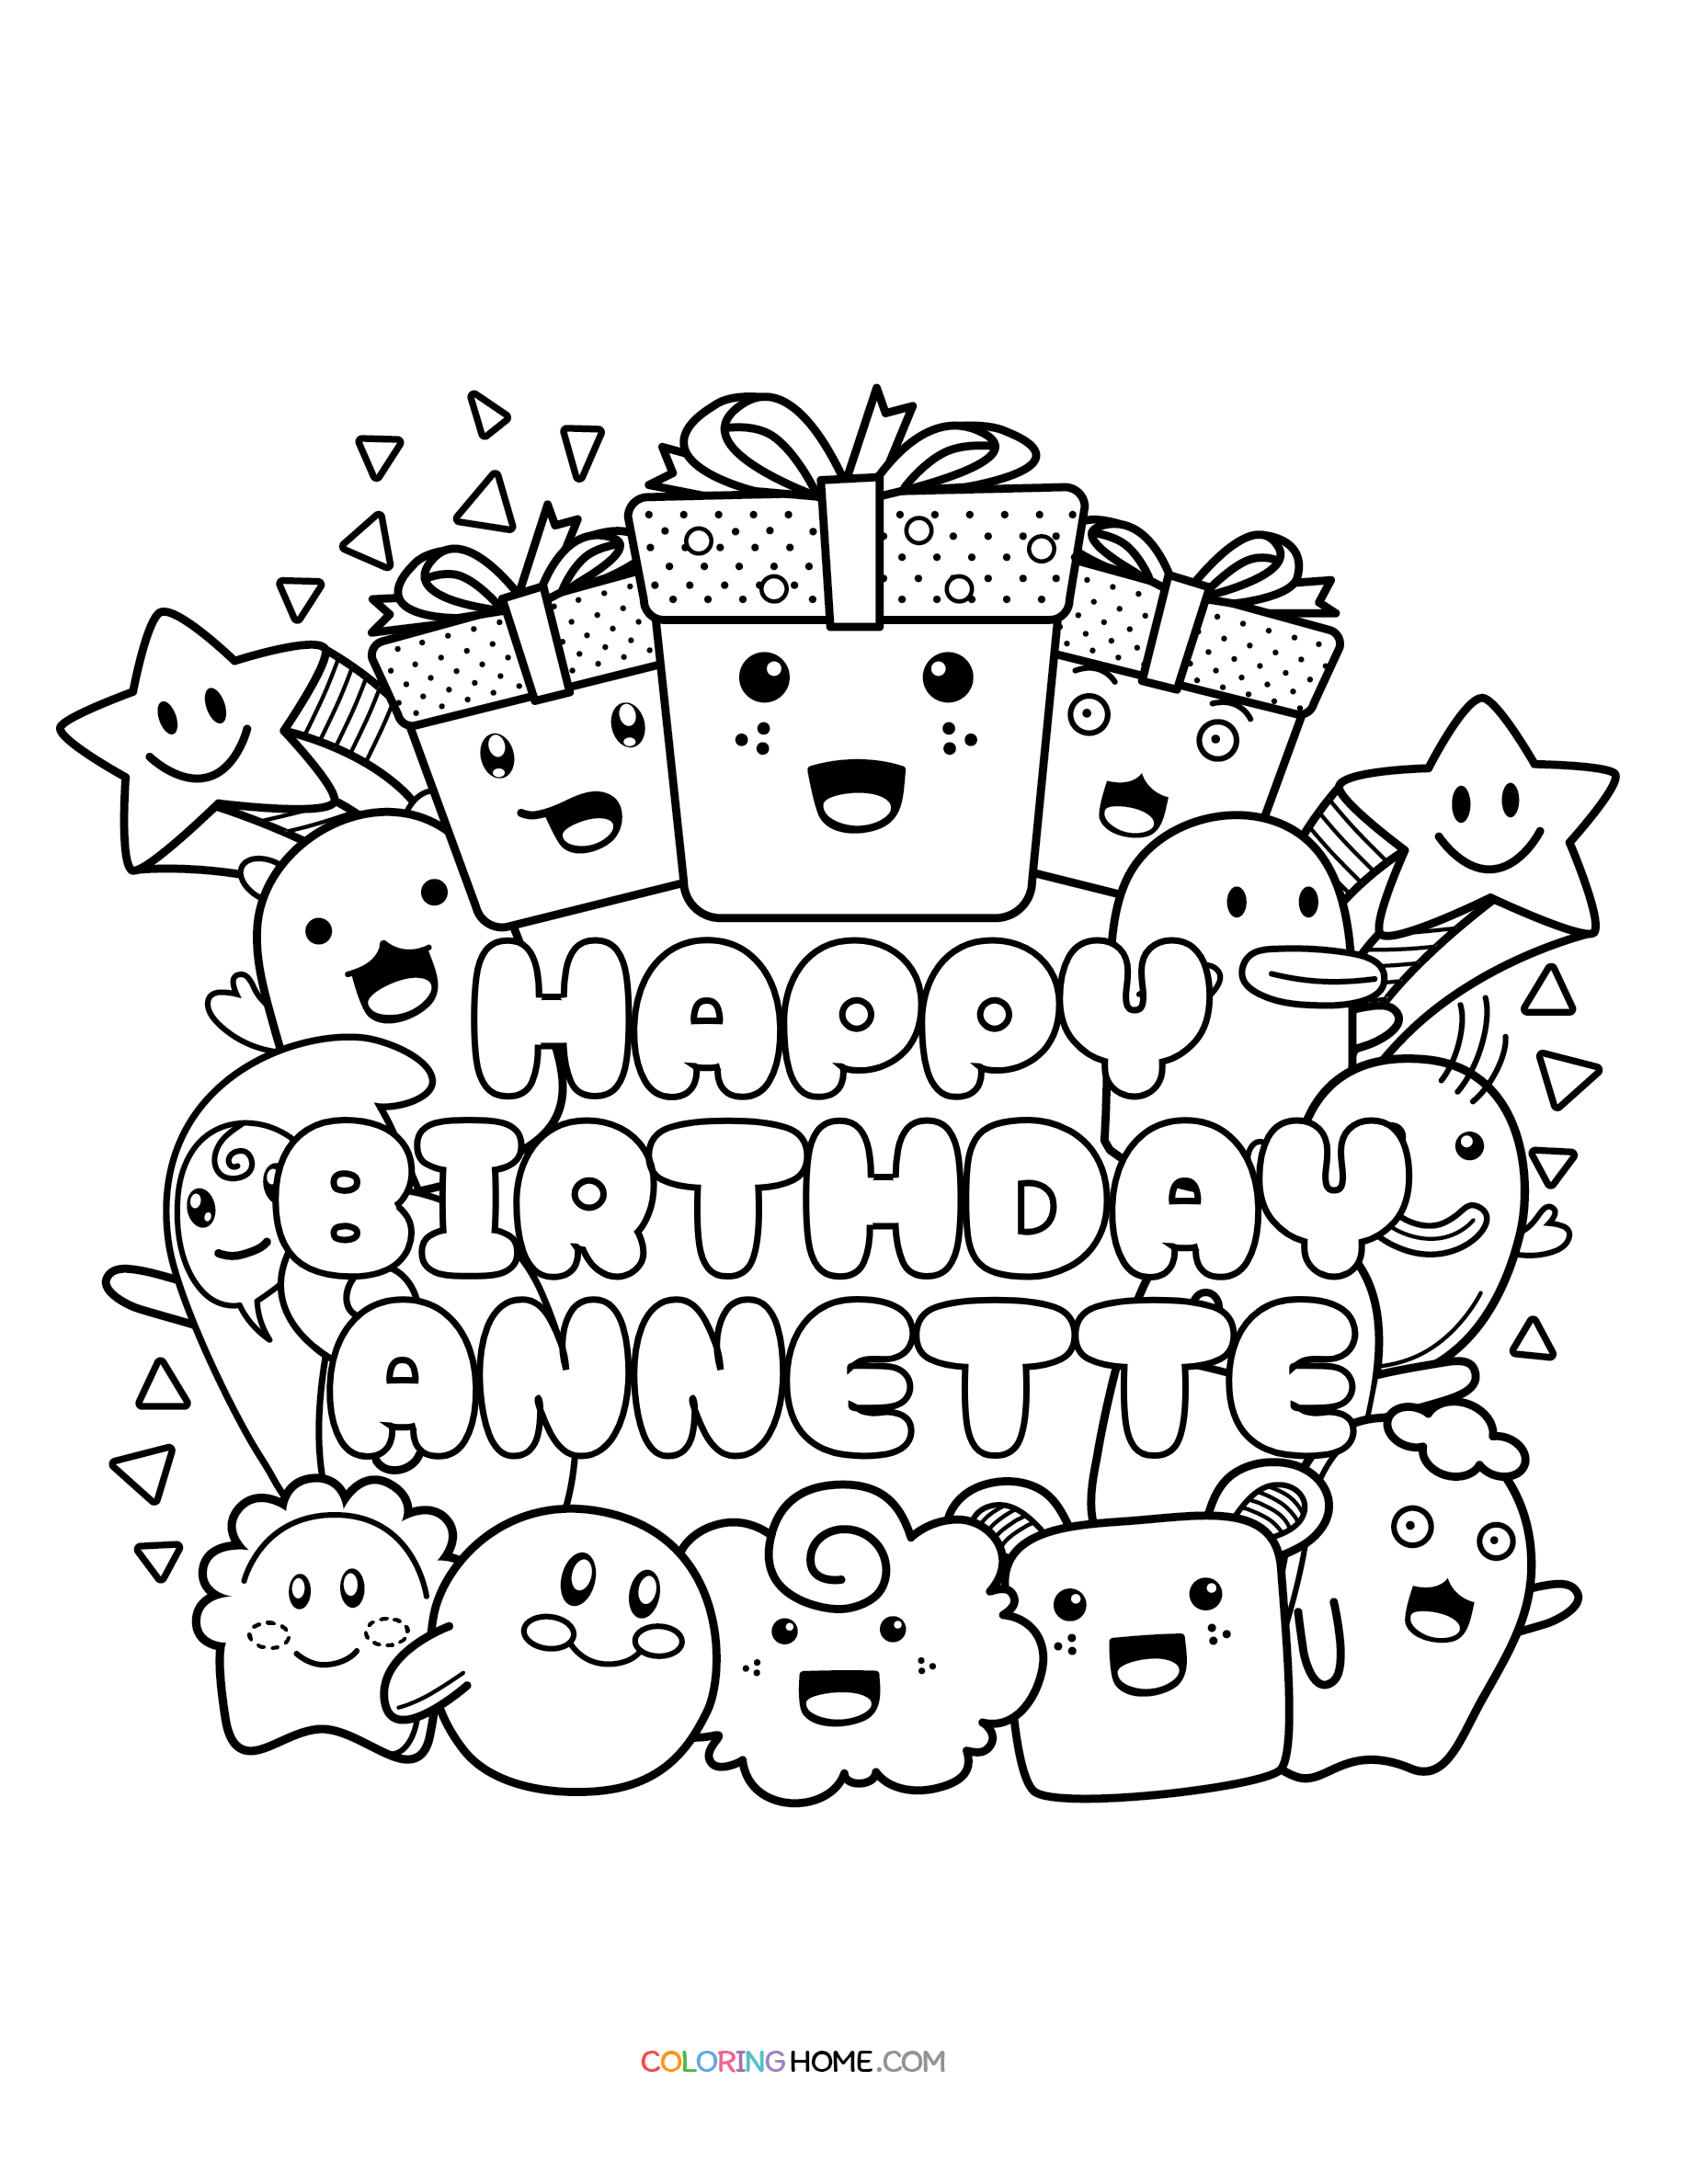 Happy Birthday Annette coloring page